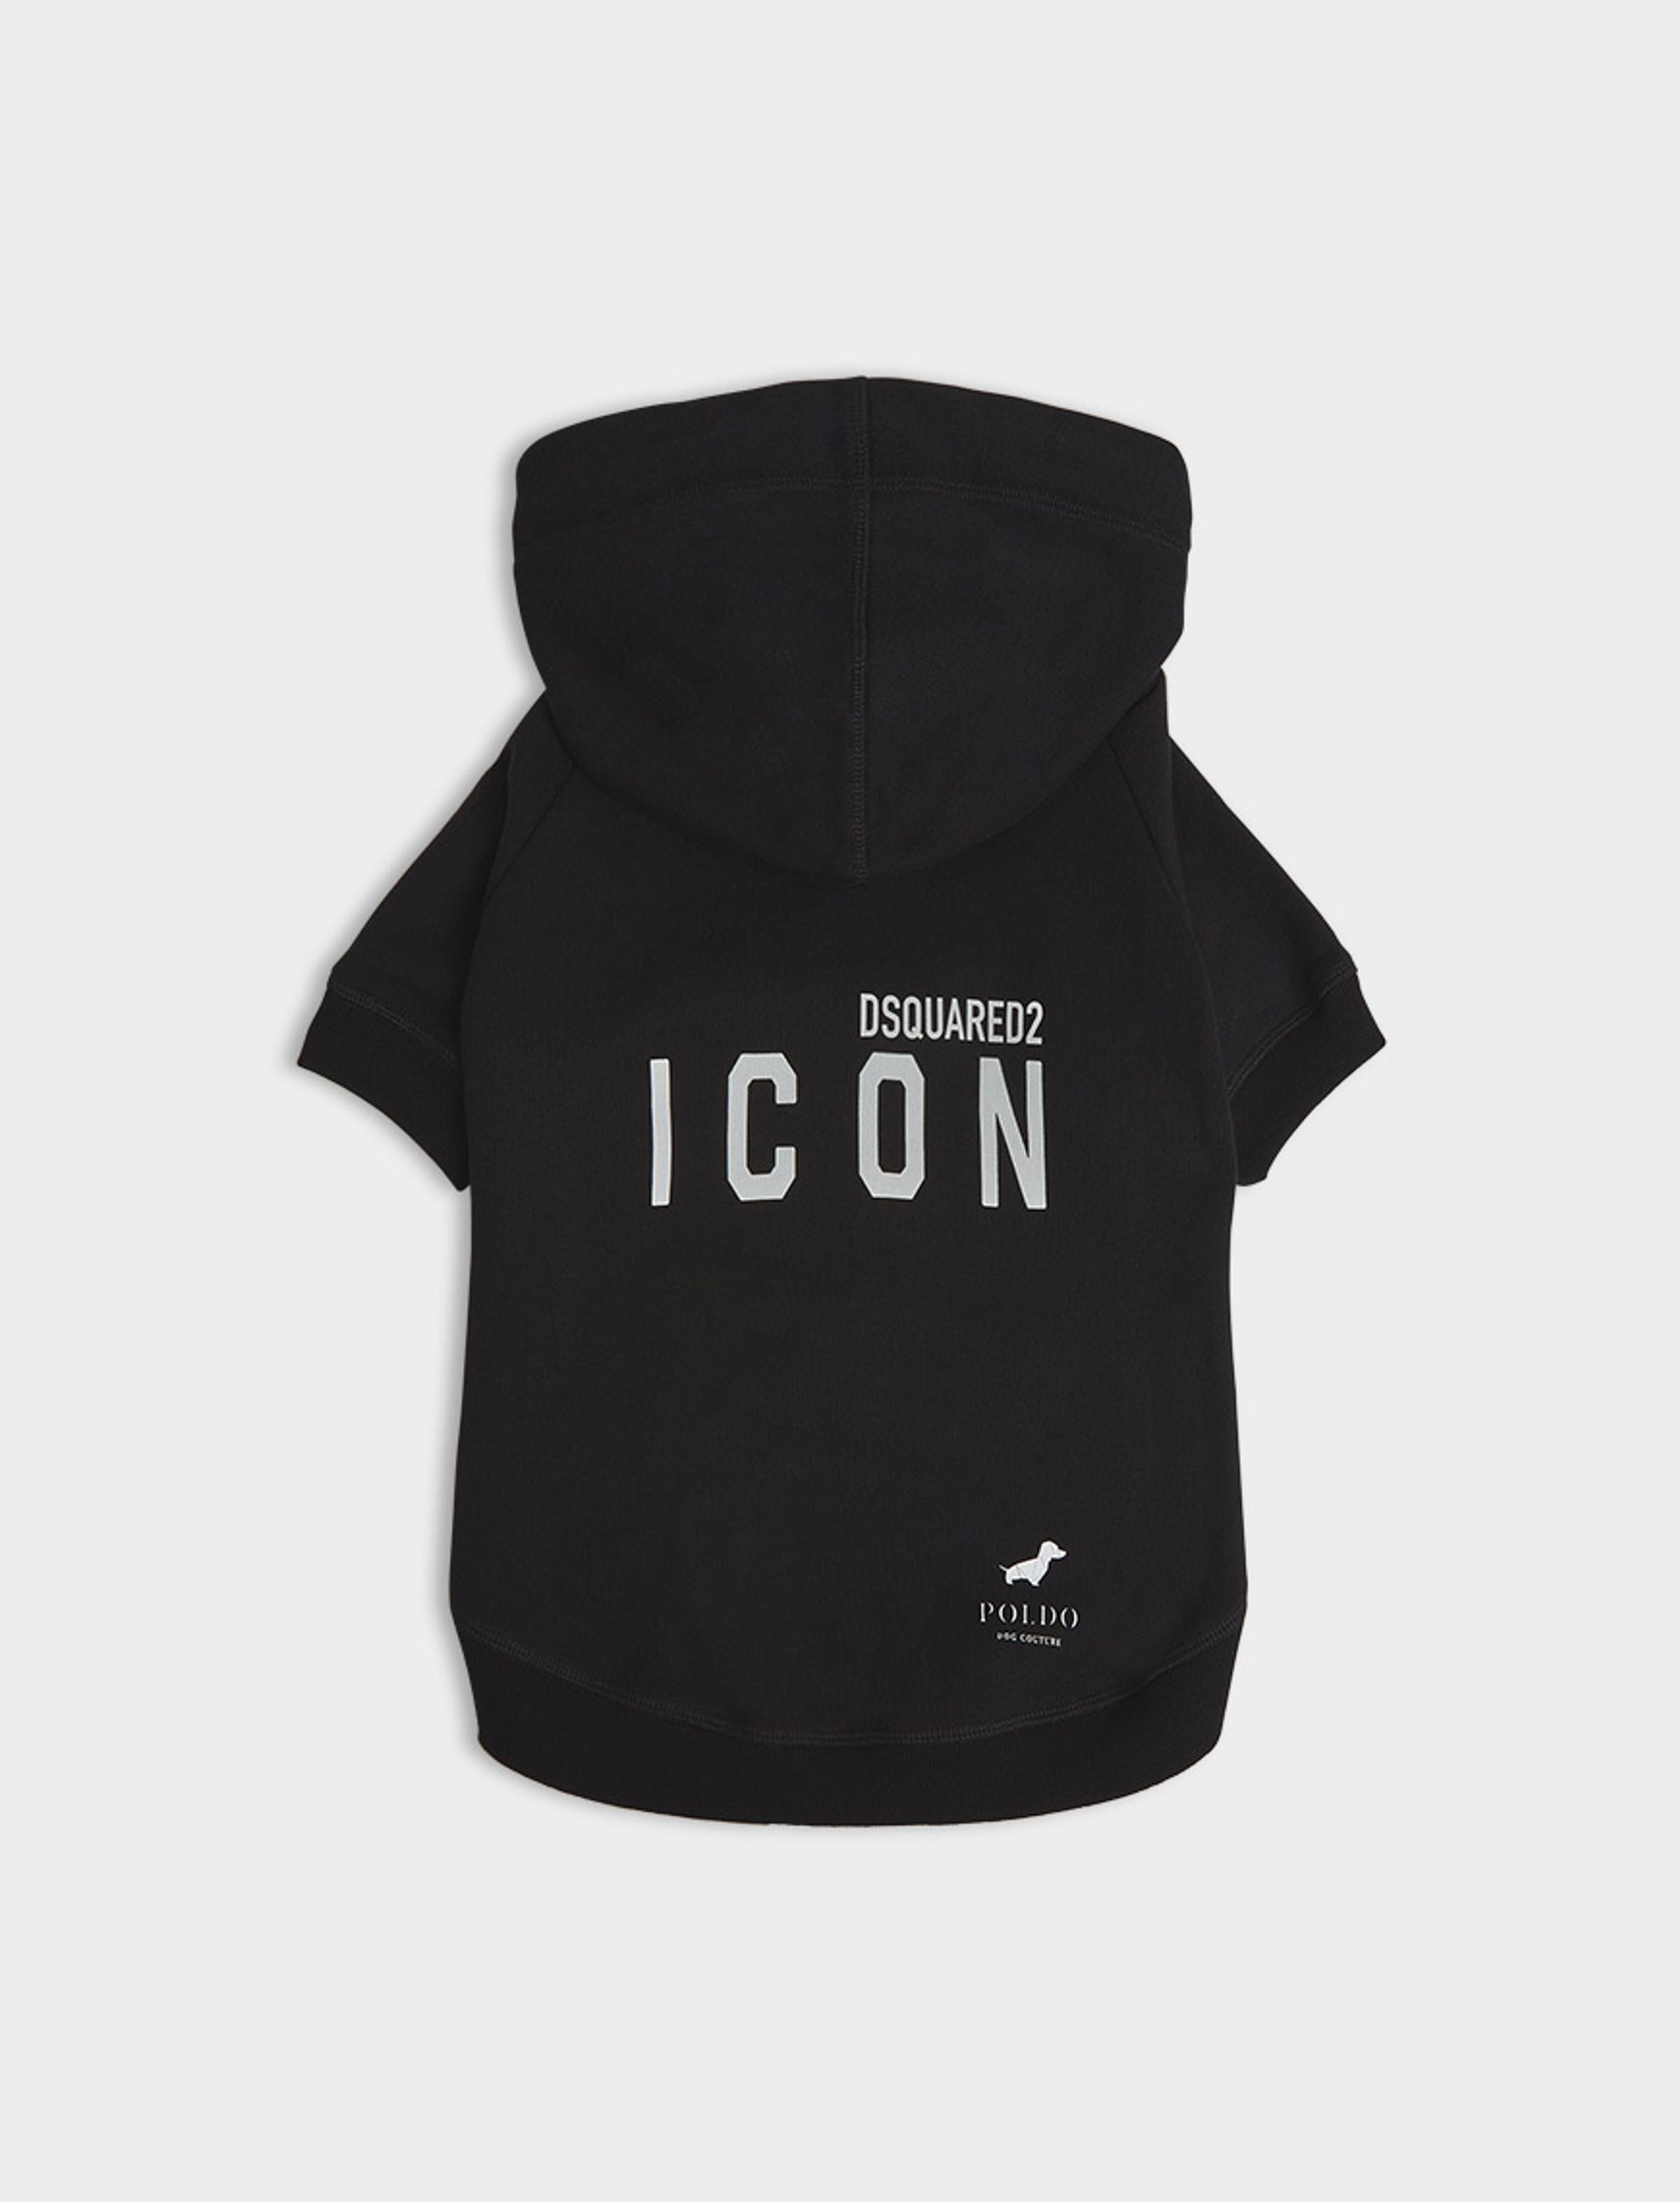 Icon Puppy sweatshirt by DSQUARED2